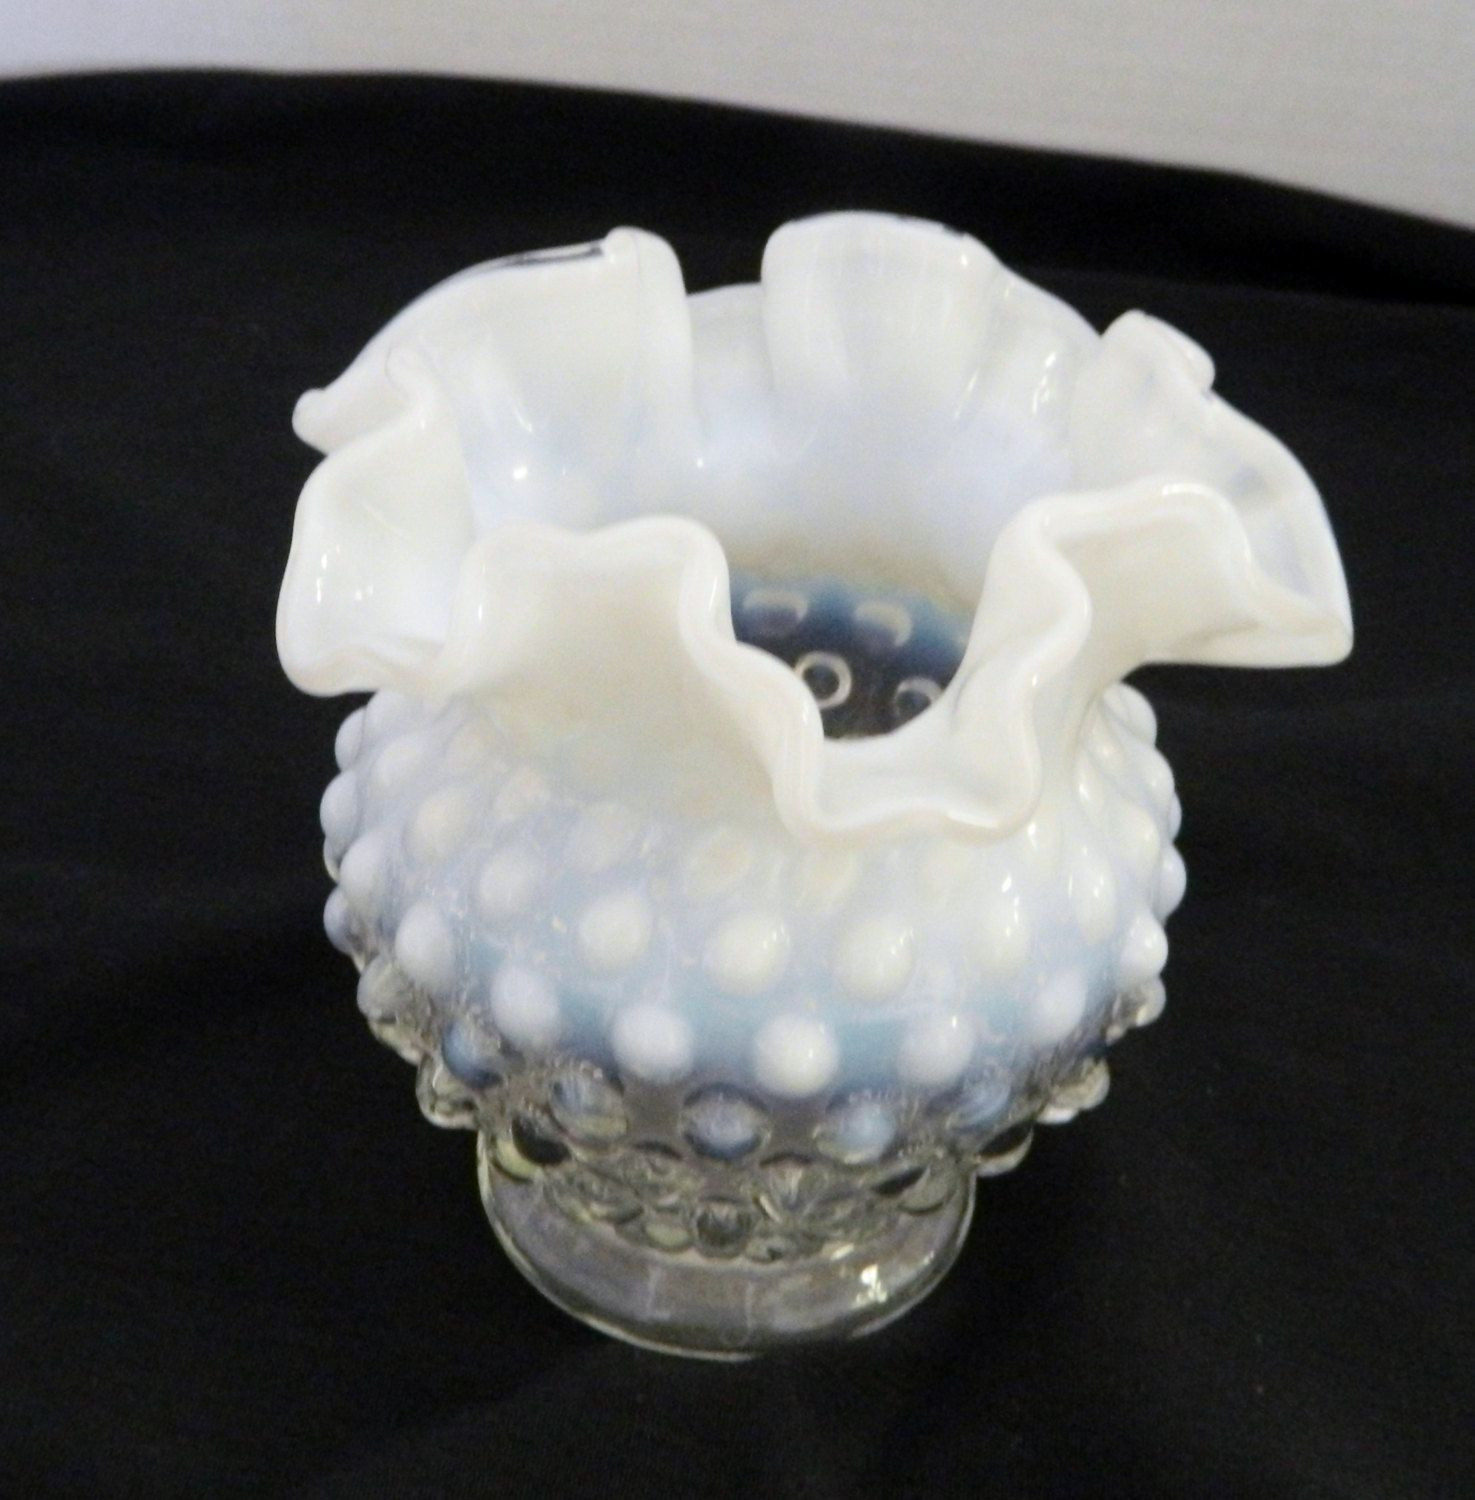 15 Nice Fenton Blue Milk Glass Vase 2024 free download fenton blue milk glass vase of 22 hobnail glass vase the weekly world intended for fenton art glass clear hobnail opalescent rose bowl vase ruffled top